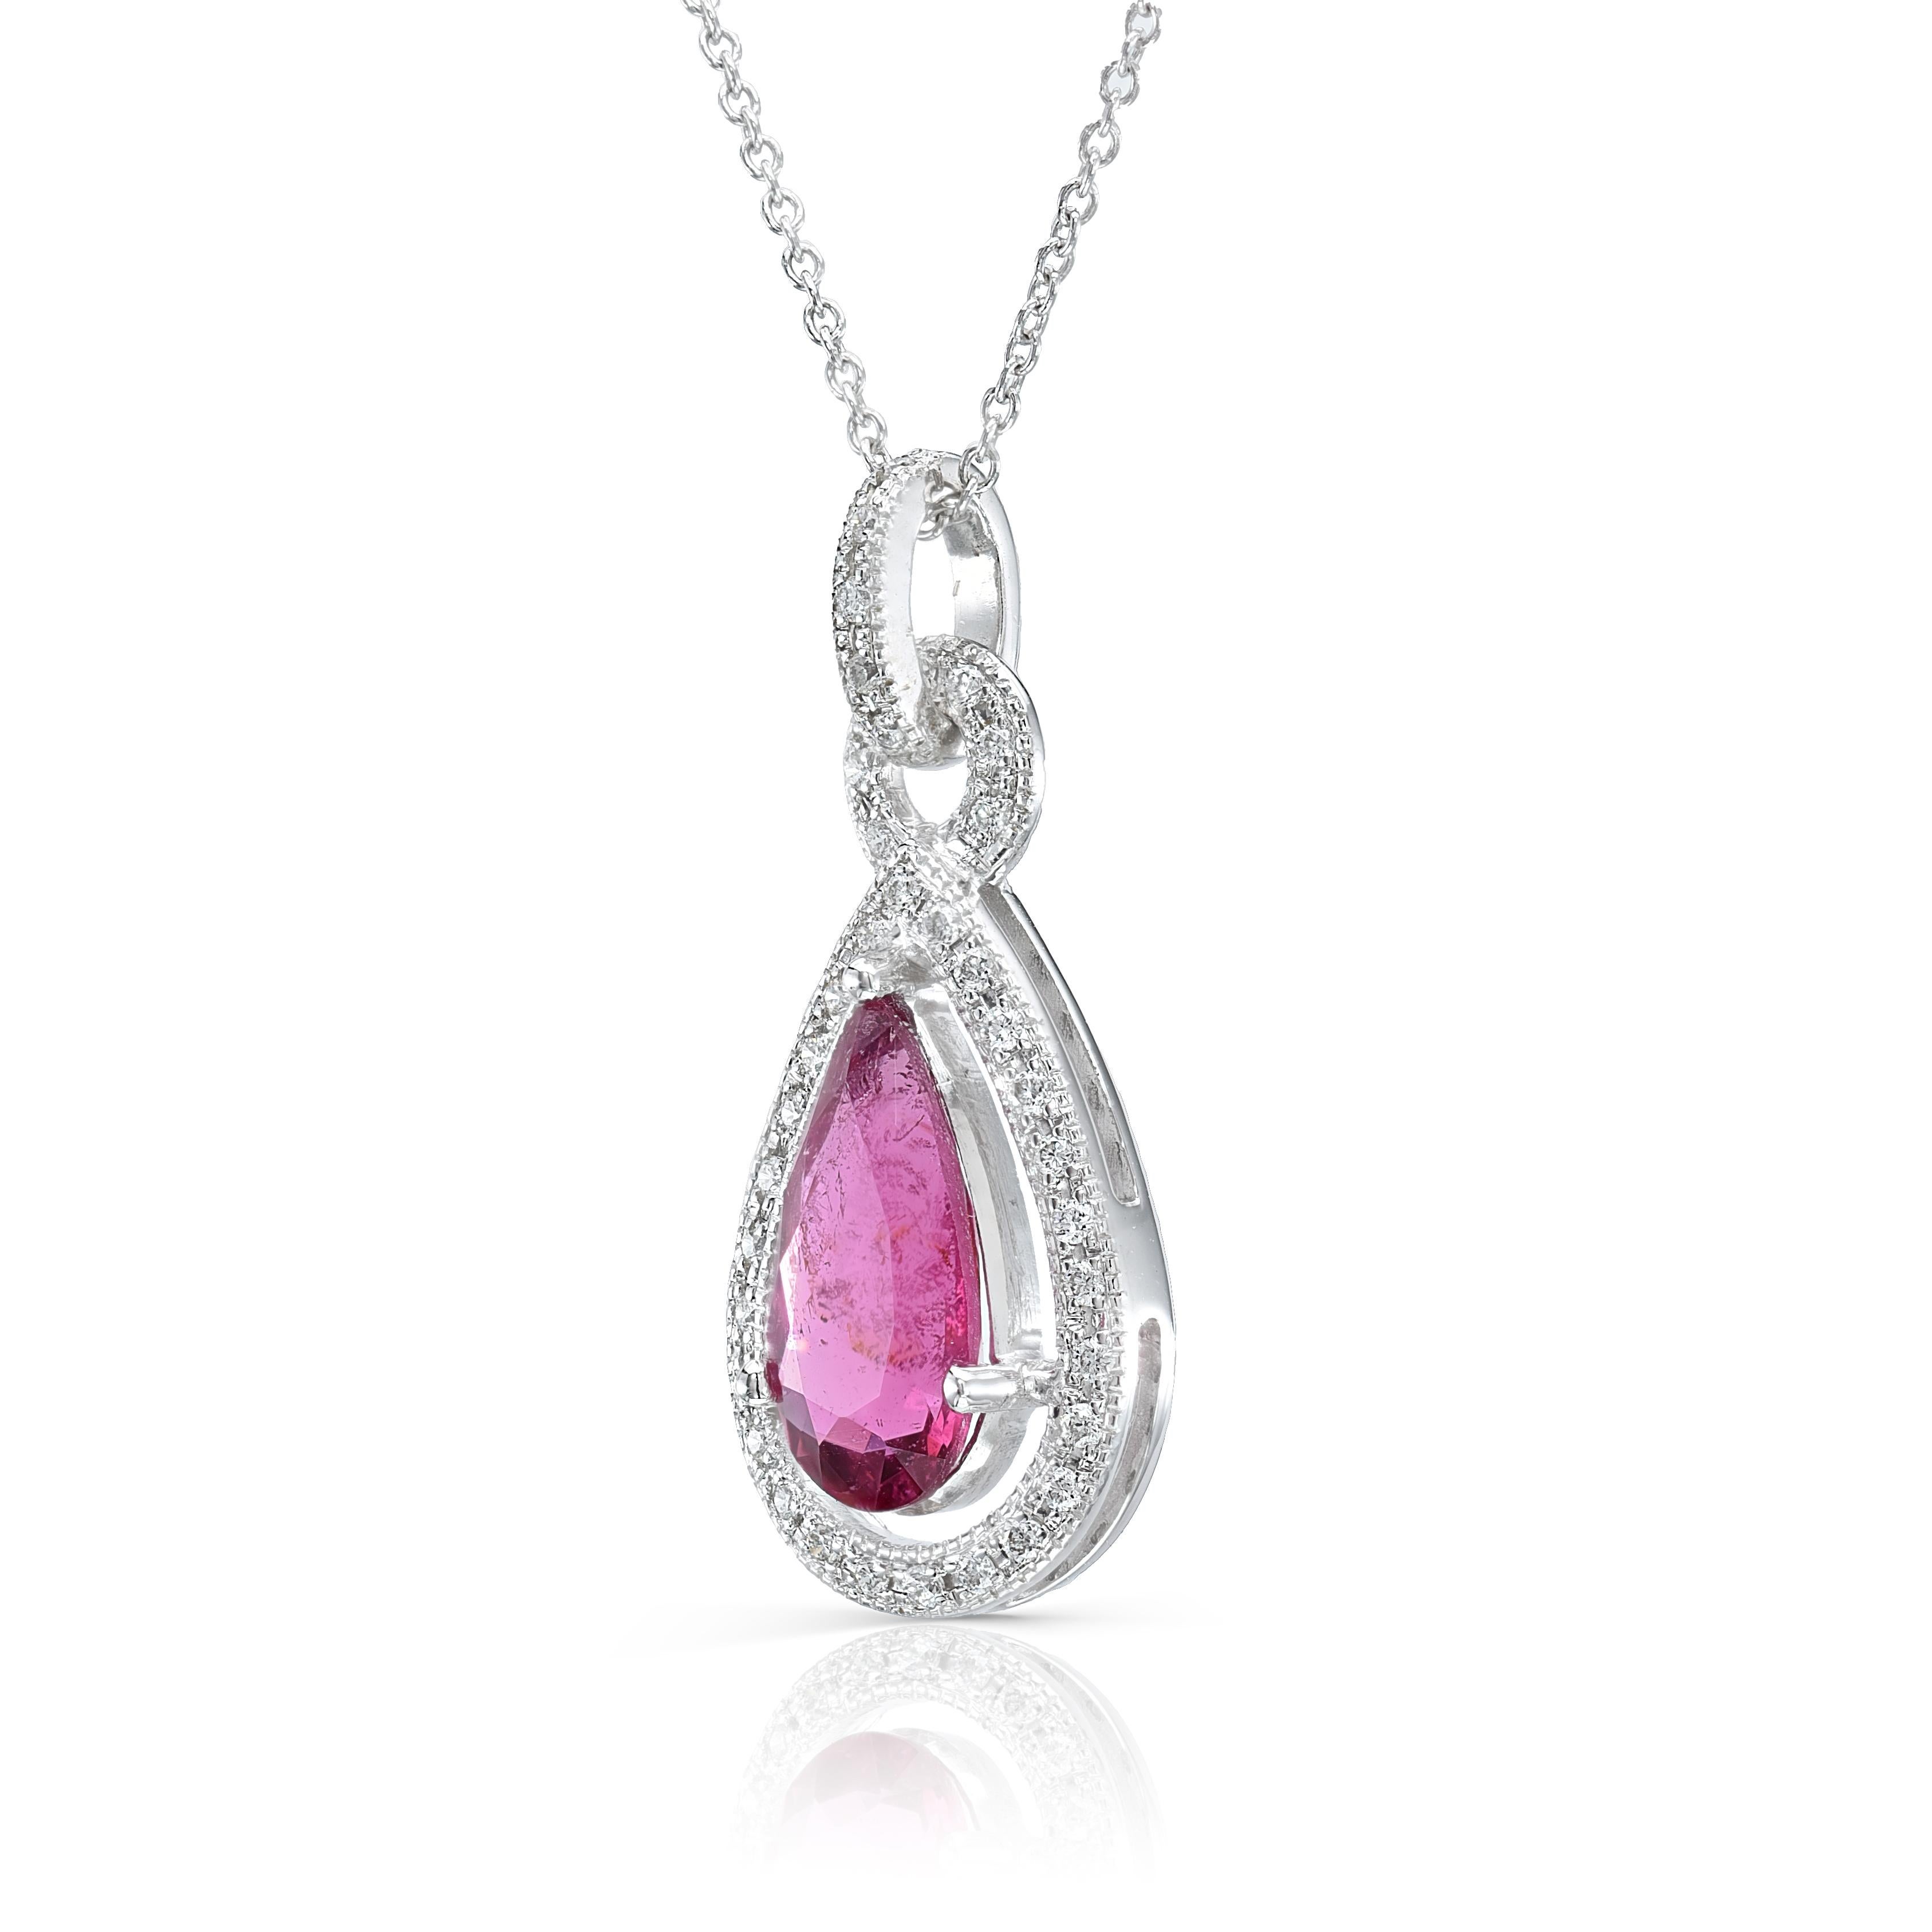 Discover Purplish Red Rubellite with the perfect blend of color could be hard to find. This 0.96 carats pear shaped Rubellite with 0.13 carats Diamonds has both the perfect color and cut that reflect just the right amount of light through the